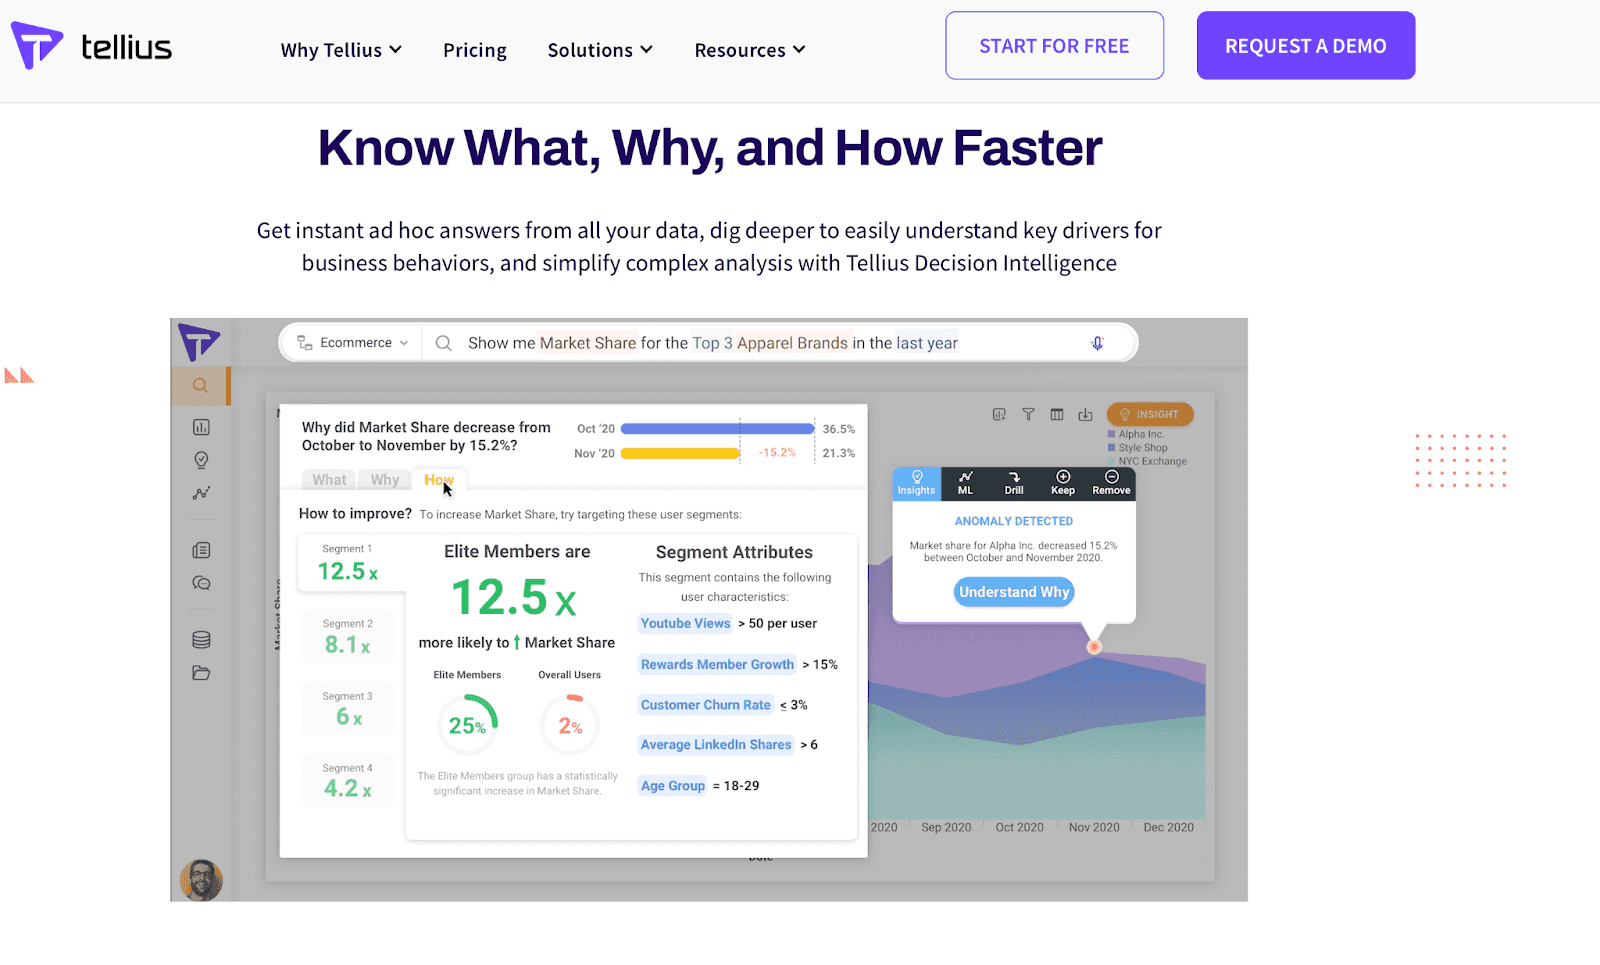 Tellius homepage - Know What, Why, and How faster